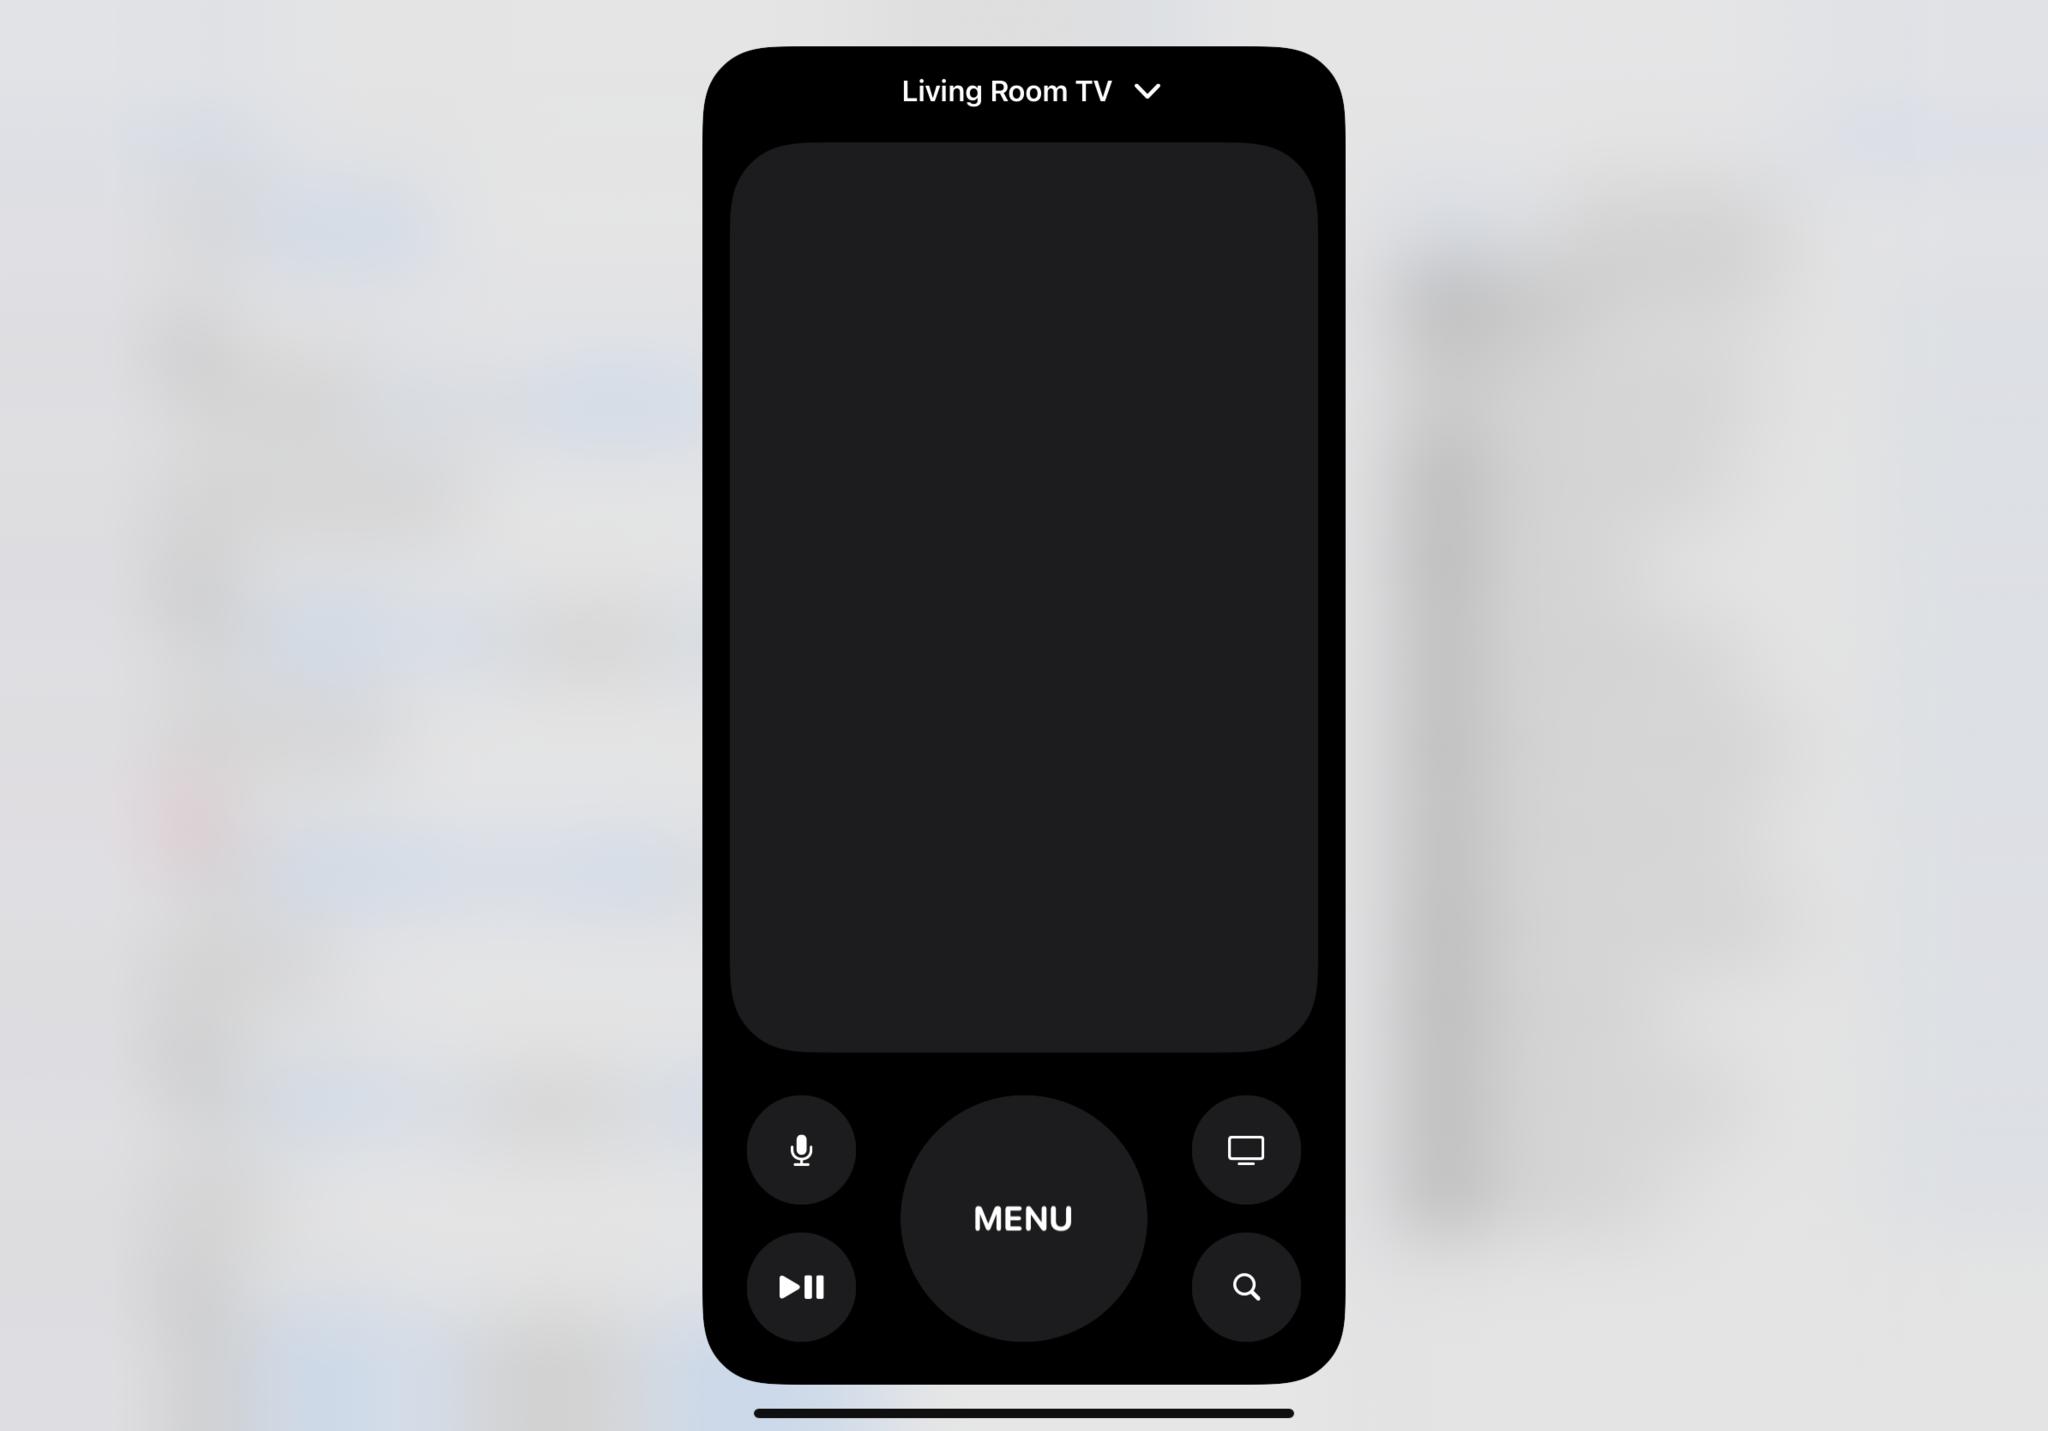 Screenshot of the Apple TV Remote being shown on-screen after activation via Shortcuts.